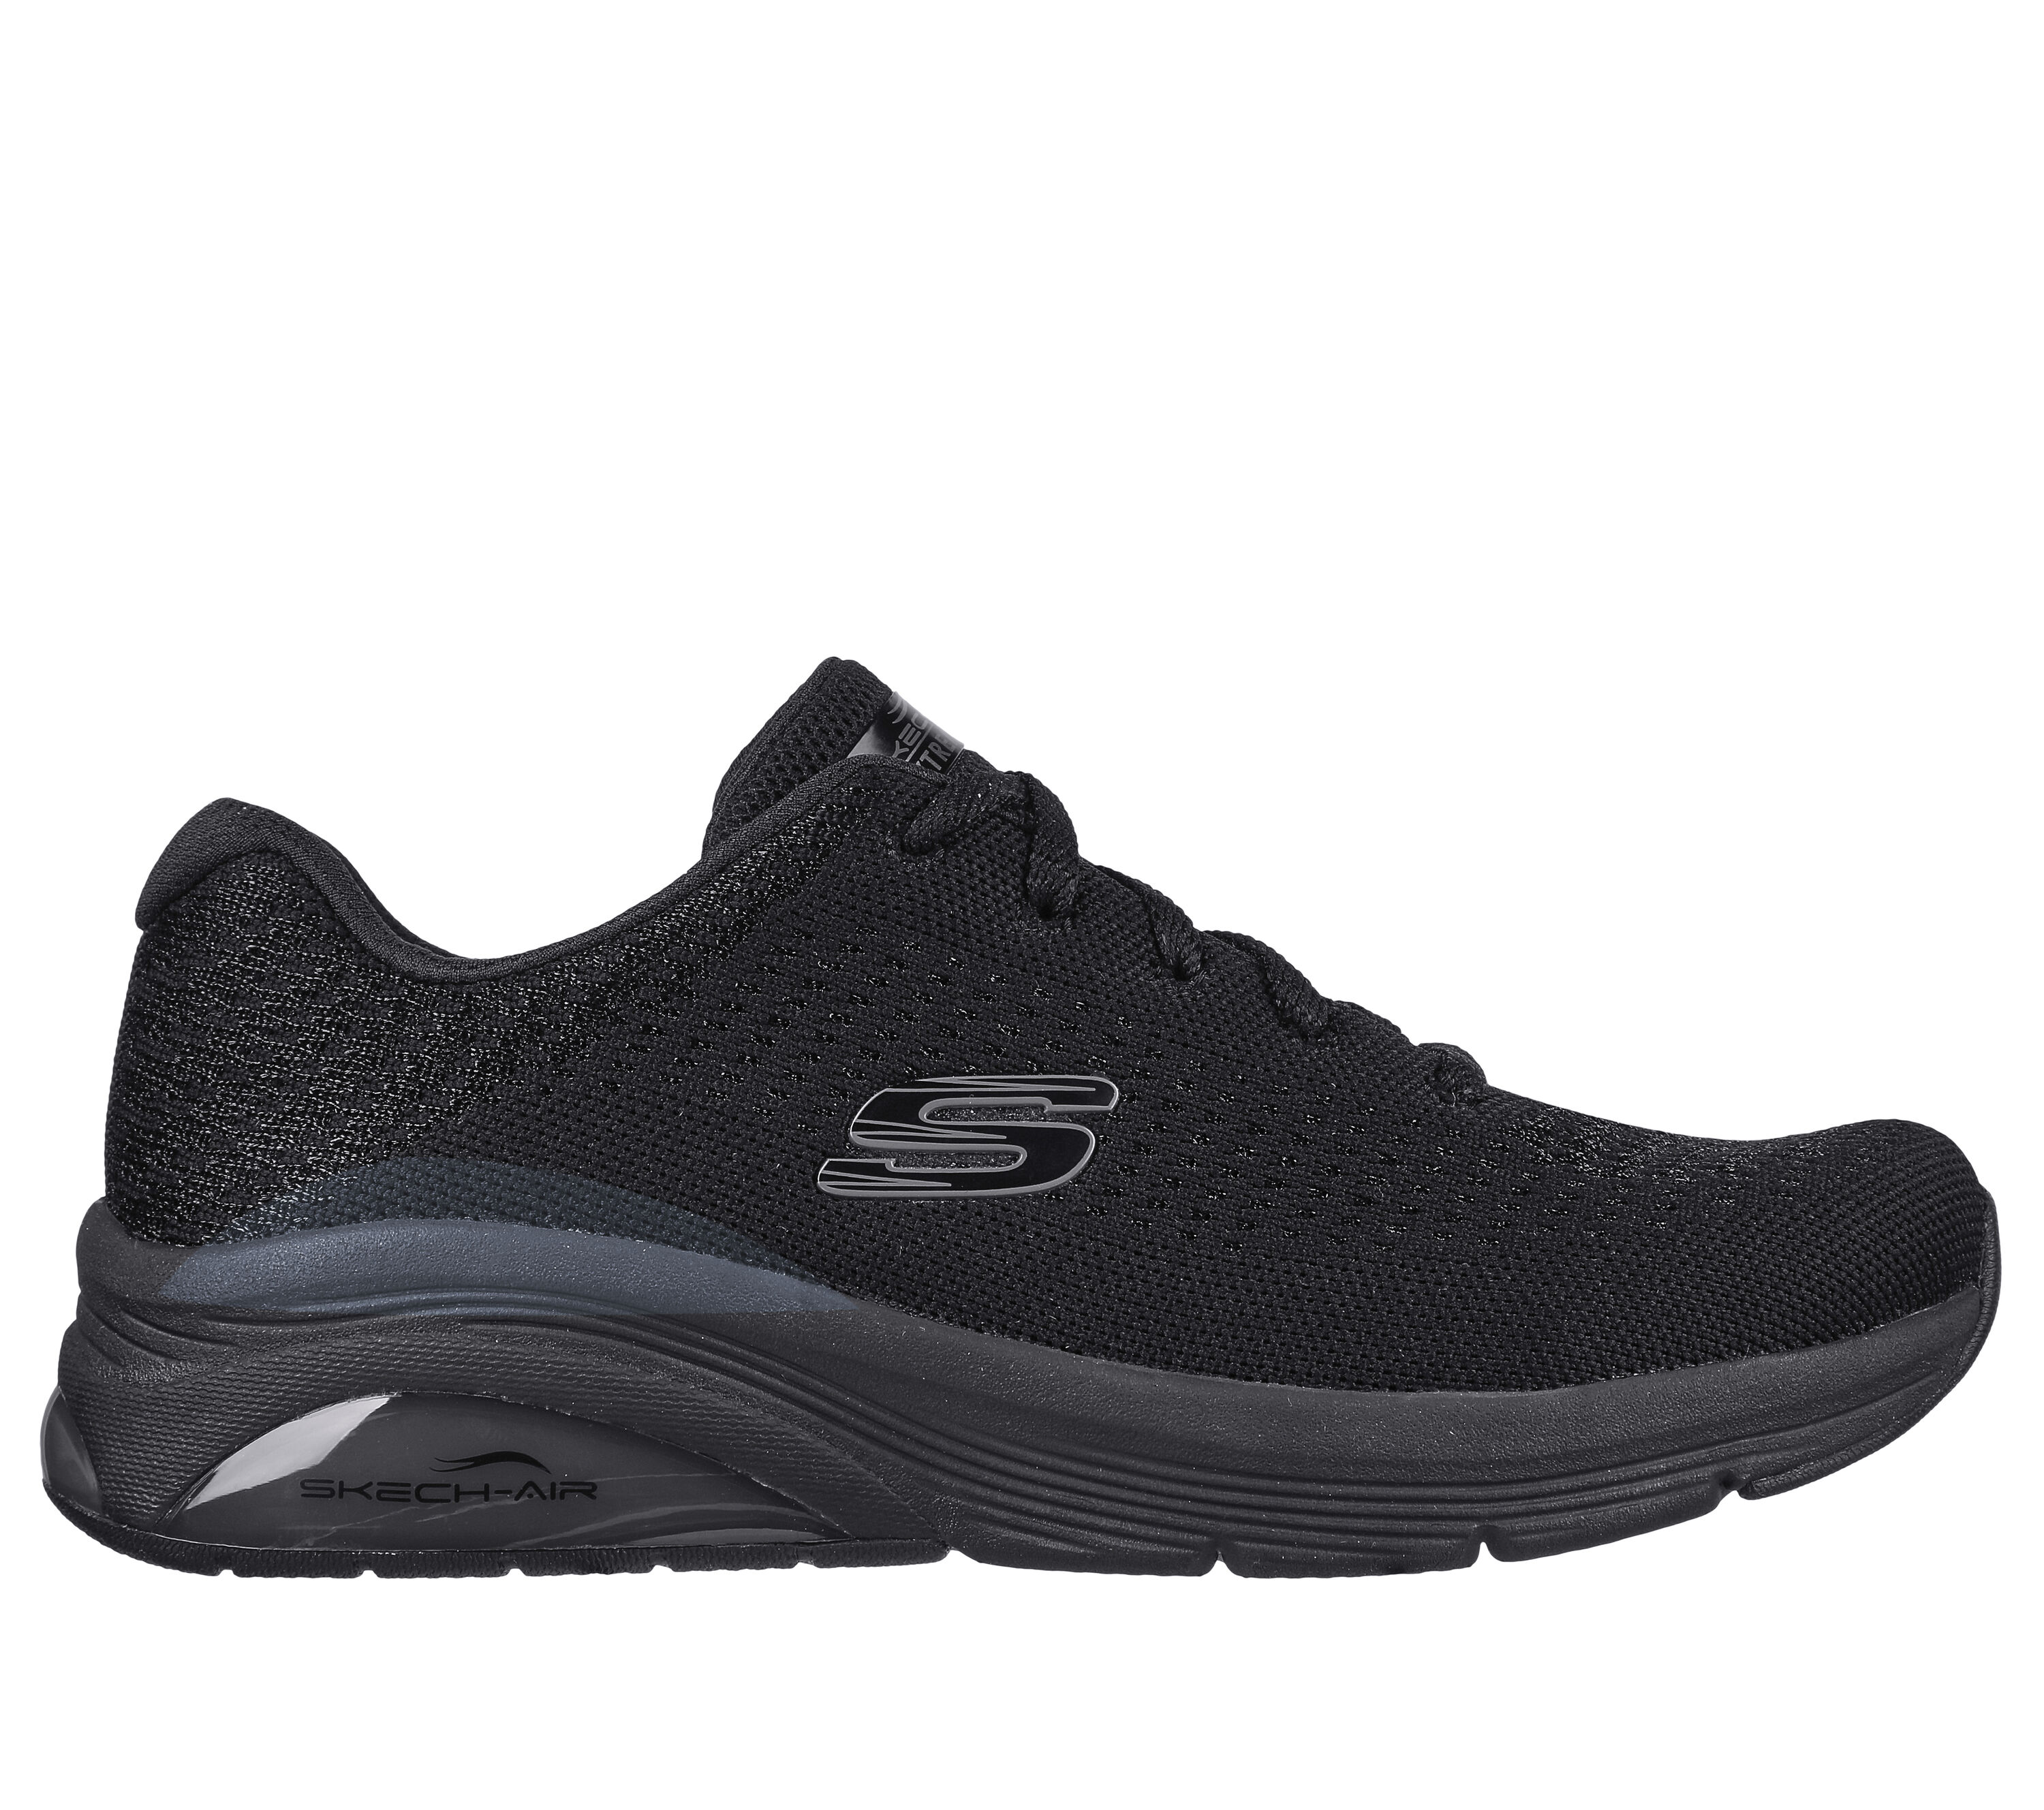 Shop the Skech-Air Extreme 2.0 - Classic Vibe | SKECHERS